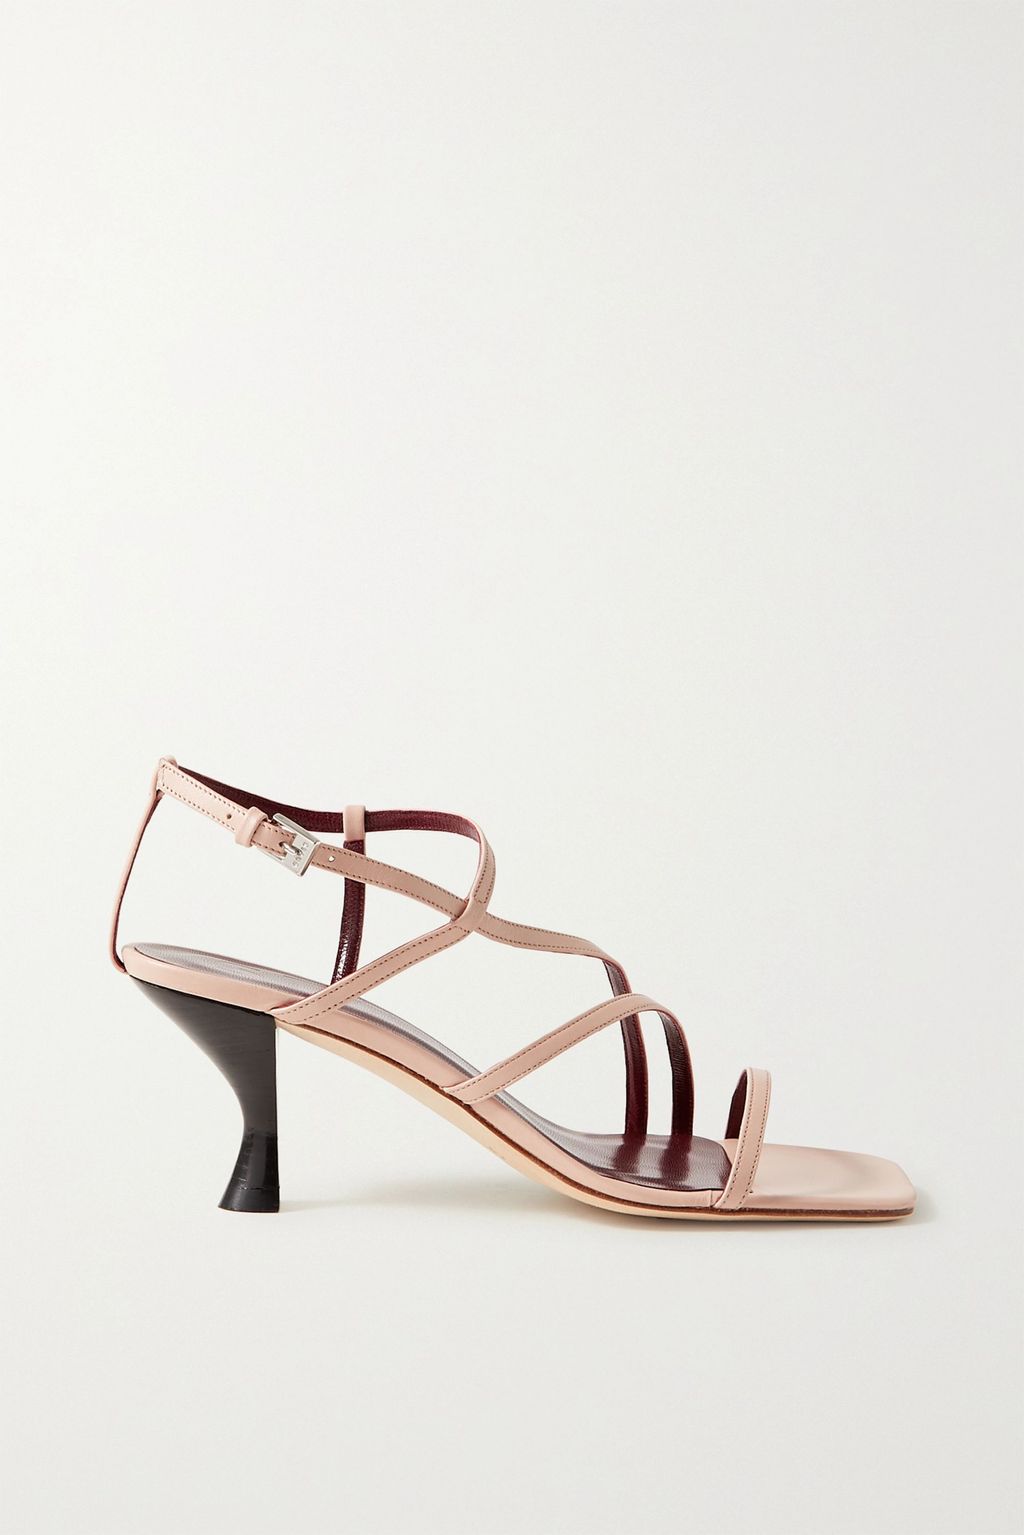 Here Are All the Best Shoes at Net-a-Porter's Summer Sale | Who What Wear